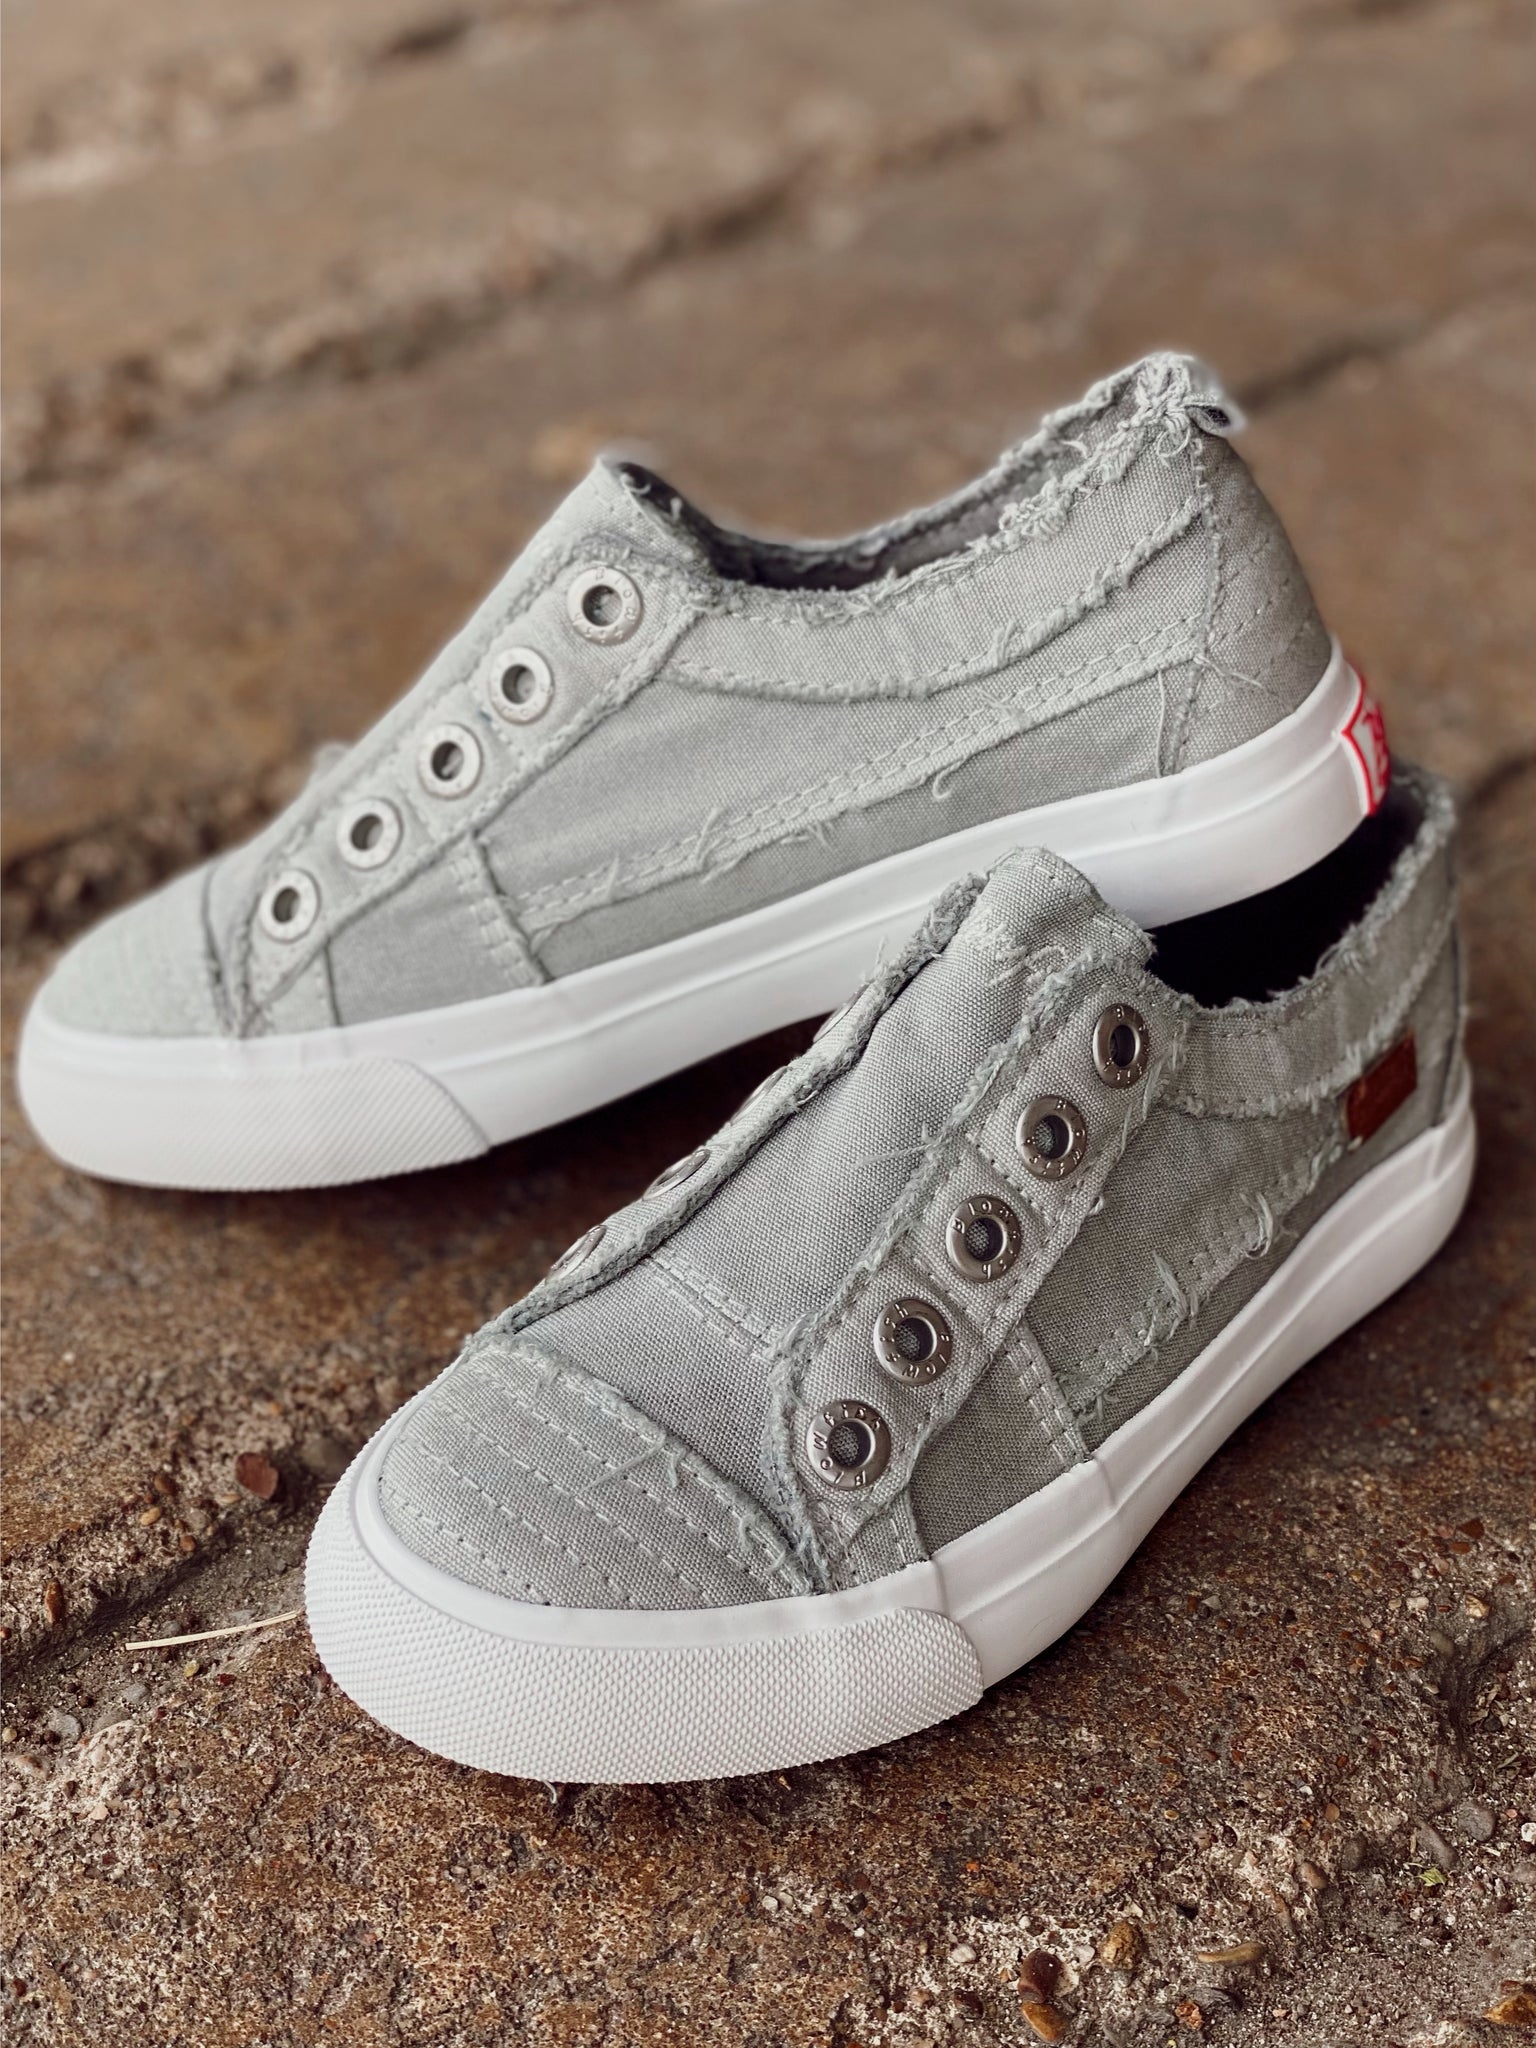 Kid's Blowfish Sneakers- Vapor color washed canvas